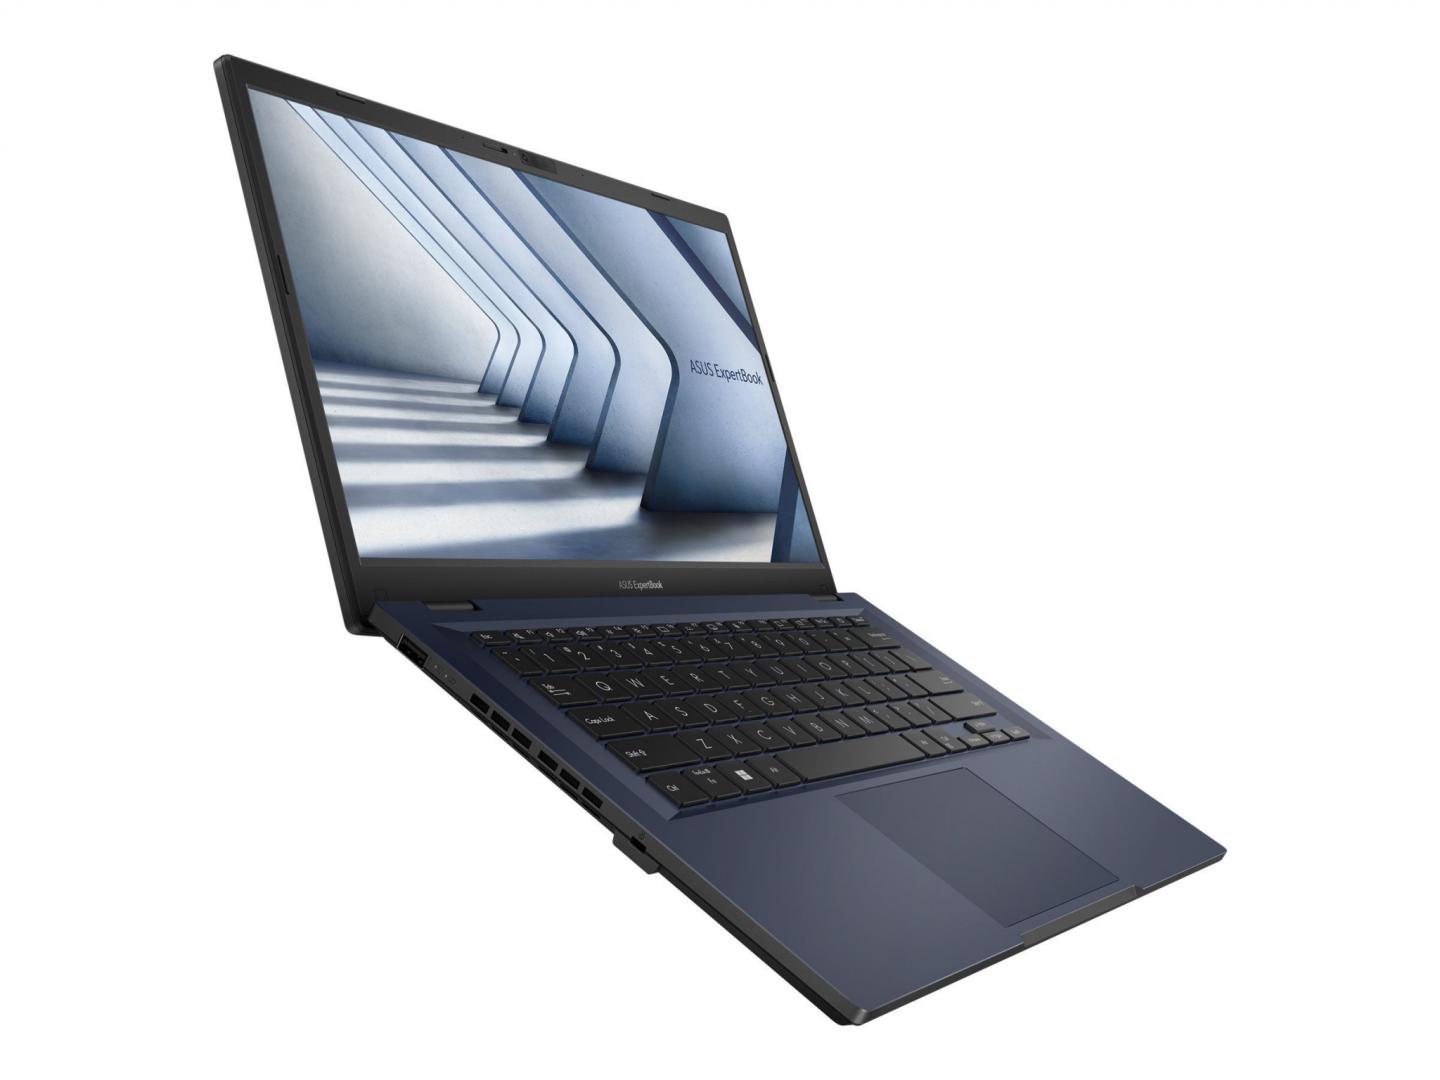 "Laptop Business ASUS ExpertBook B1, B1402CGA-NK0292, 14.0-inch, FHD (1920 x 1080) 16:9, Intel® Core™ i3-N305 Processor 1.8 GHz (6M Cache, up to 3.8 GHz, 8 cores), Intel® UHD Graphics, 1x DDR4 SO-DIMM slot 1x M.2 2280 PCIe 3.0x2, DDR4 8GB, 256GB M.2 NVMe™ PCIe® 3.0 SSD, 60Hz, 250nits, Anti-glare